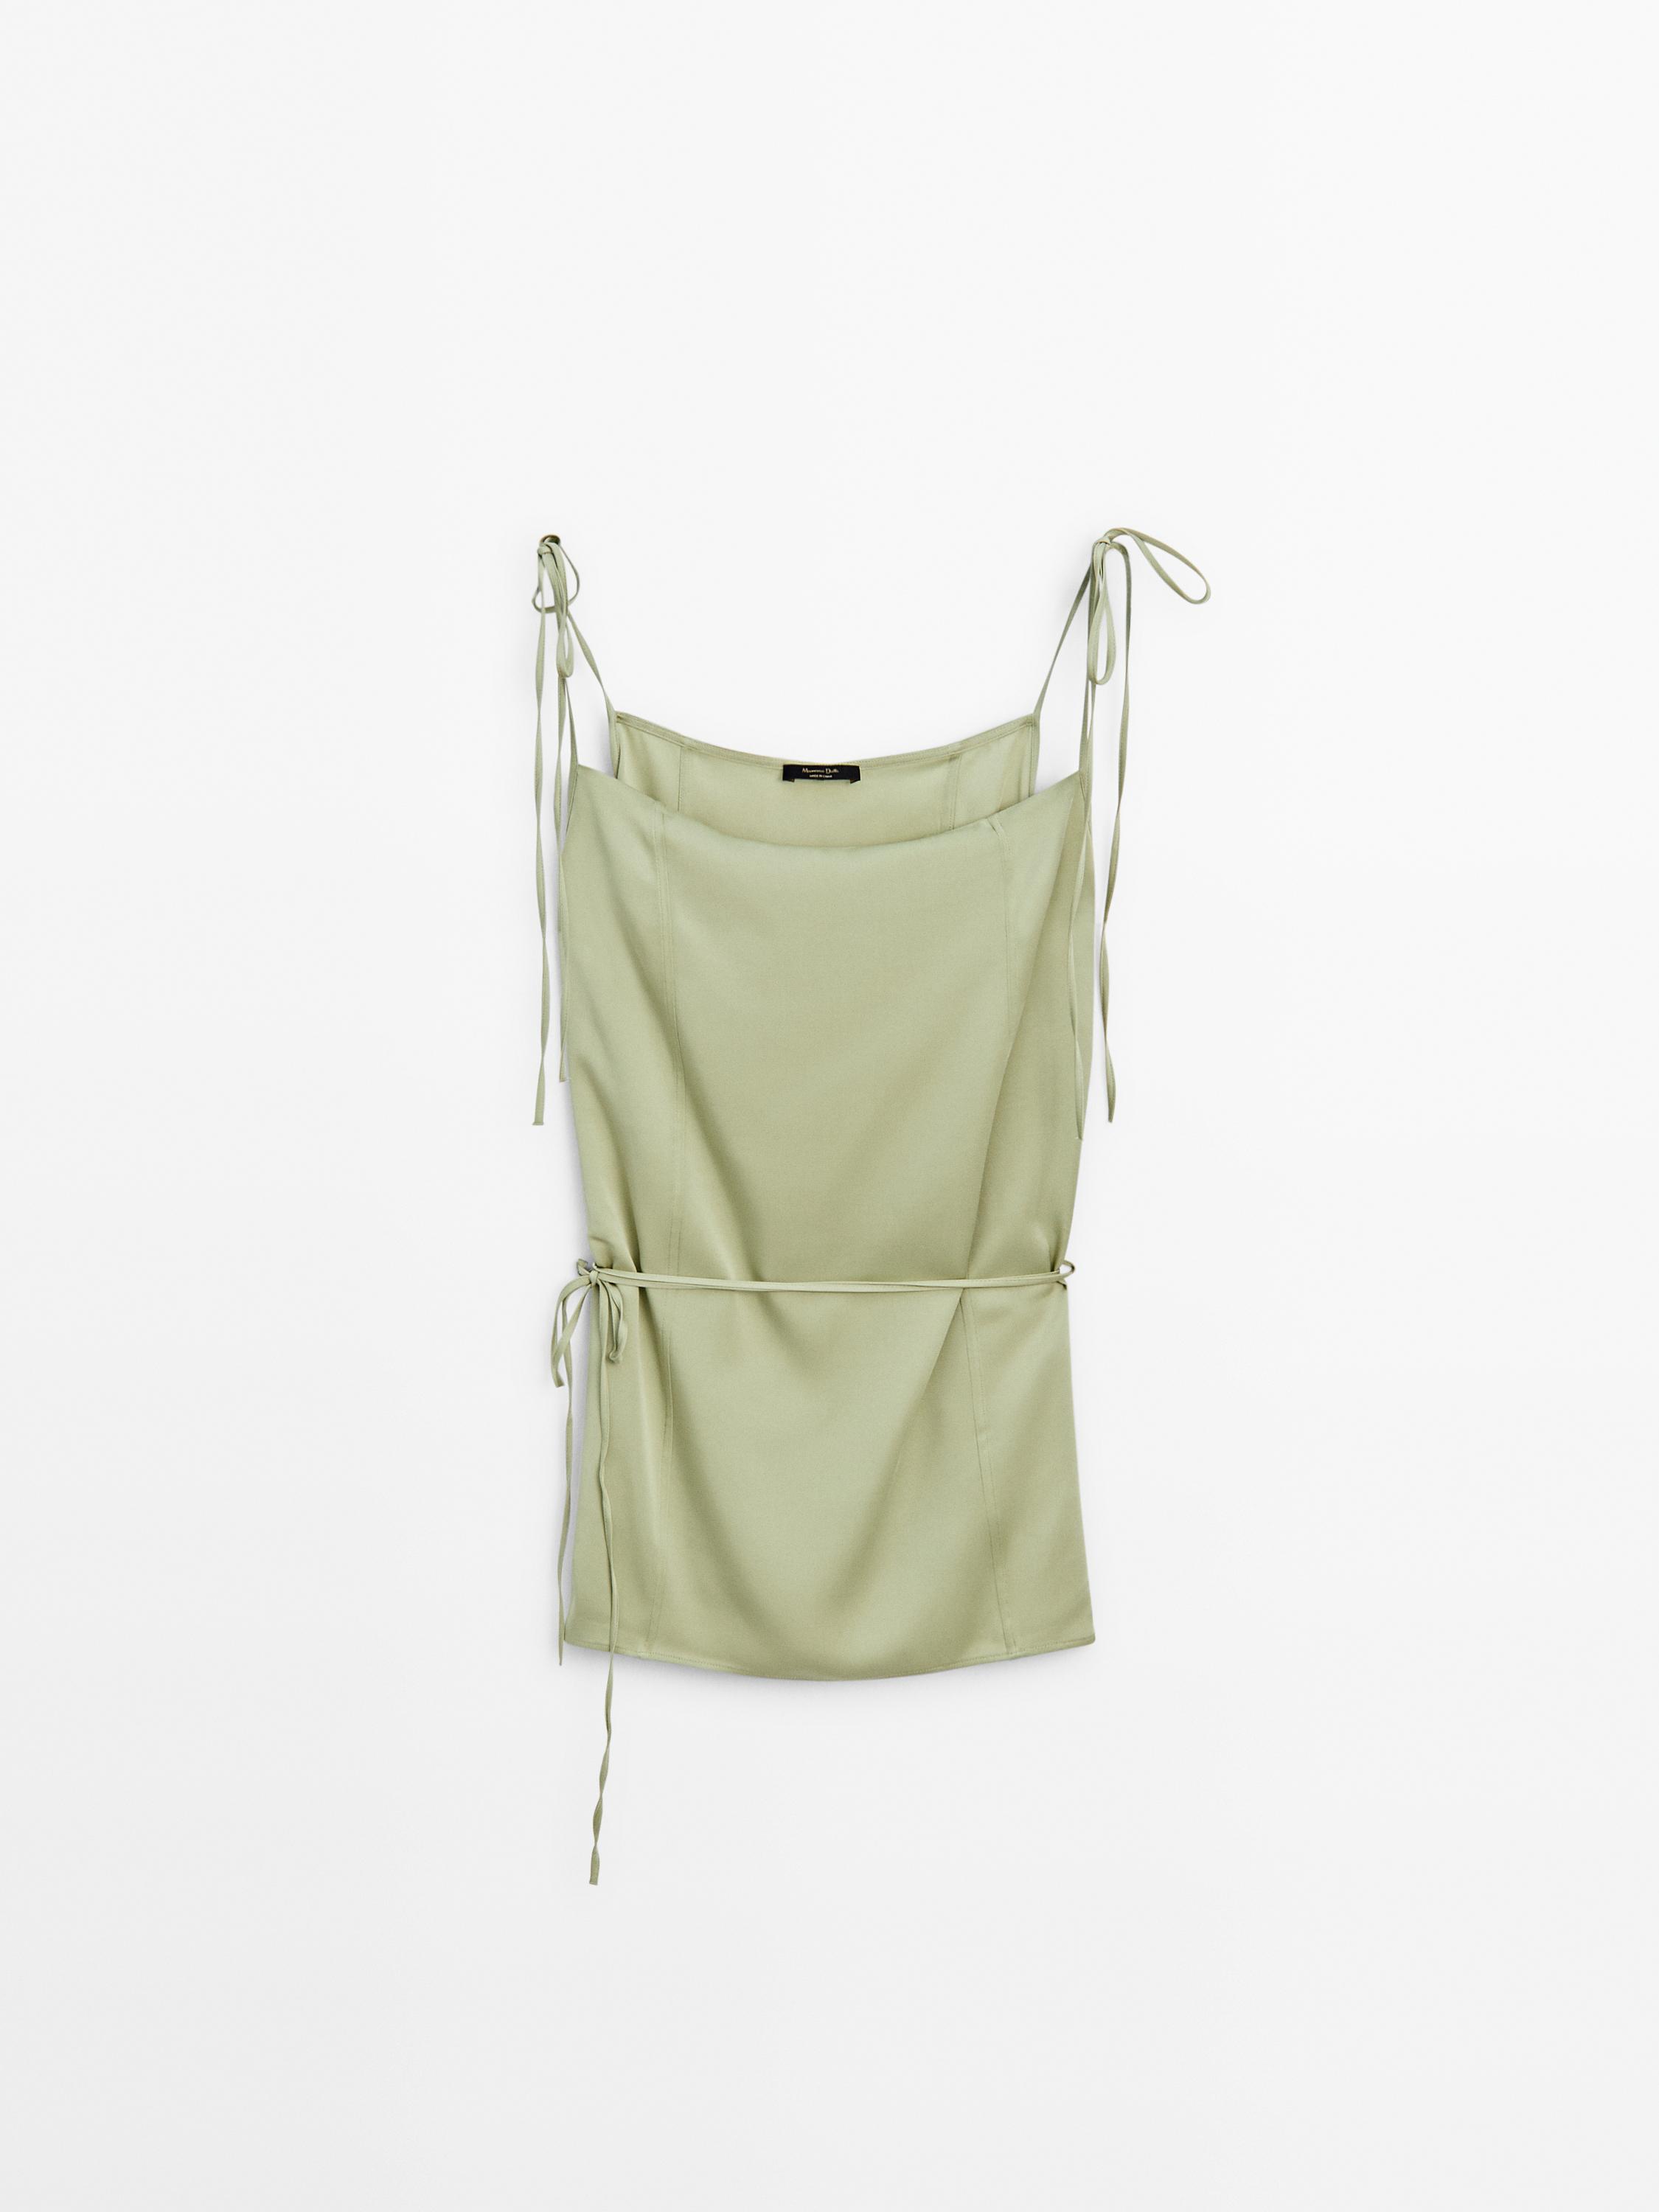 Camisole top with tie detail - Lime green | ZARA United States